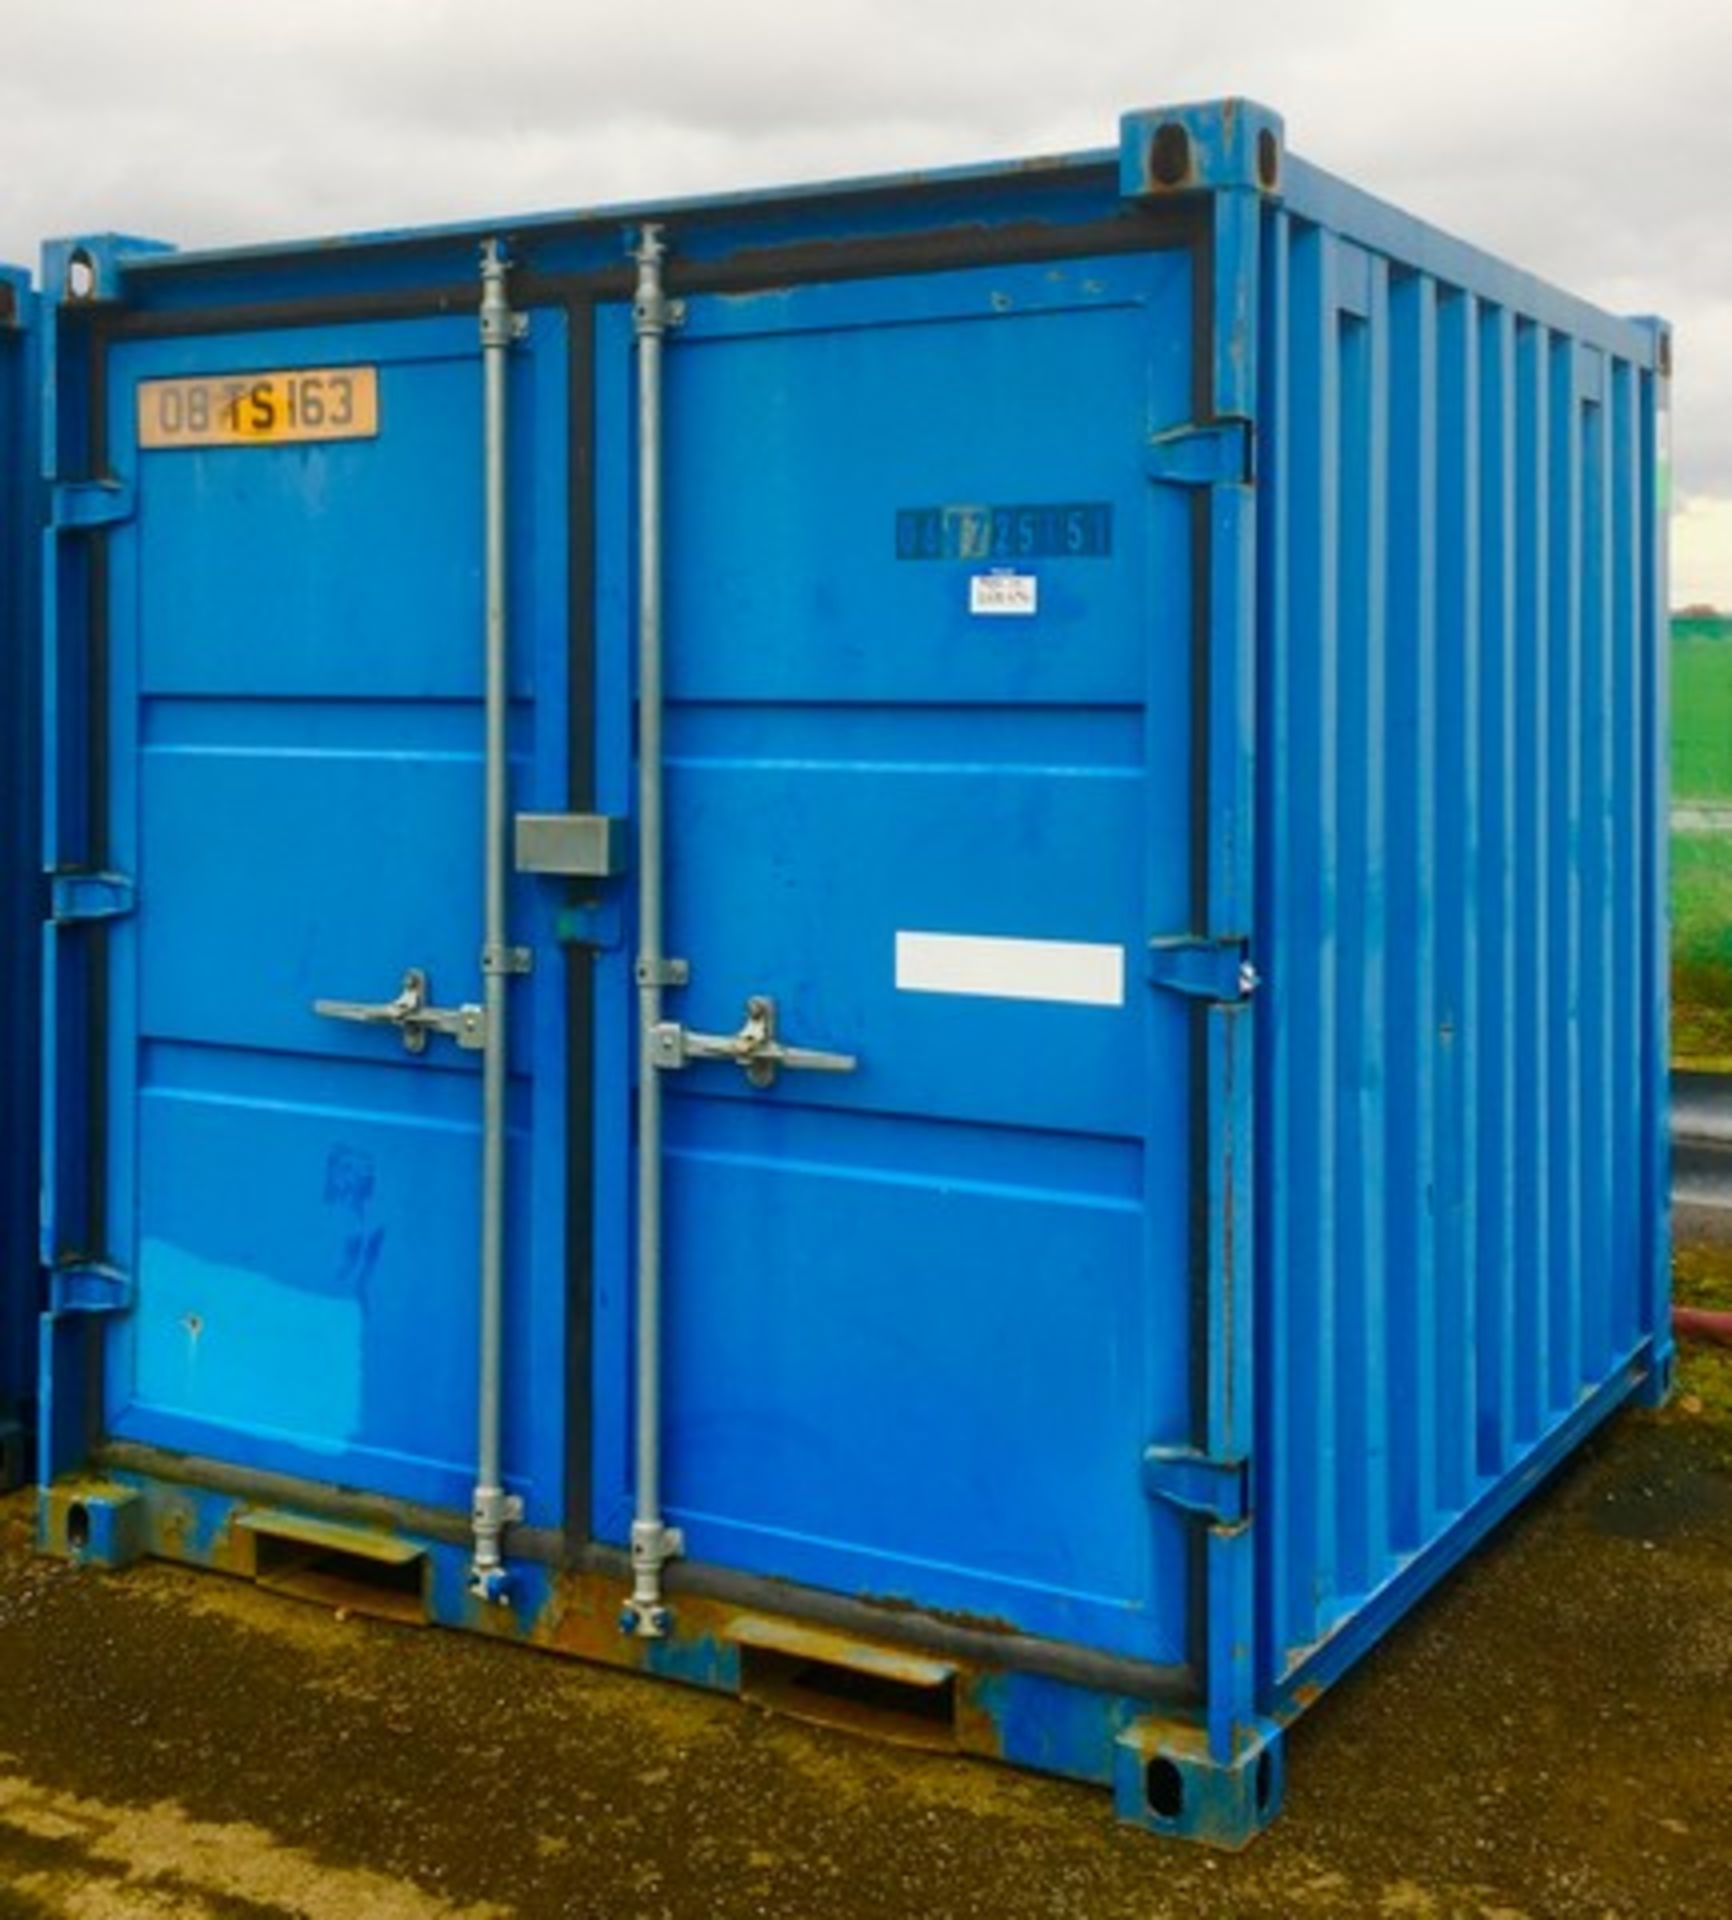 7ft x 8ft CONTAINEX STORAGE CONTAINER 2007 - LOCKBOX, STEEL STORE, LIFTING EYES, FORK POCKETS, VENT